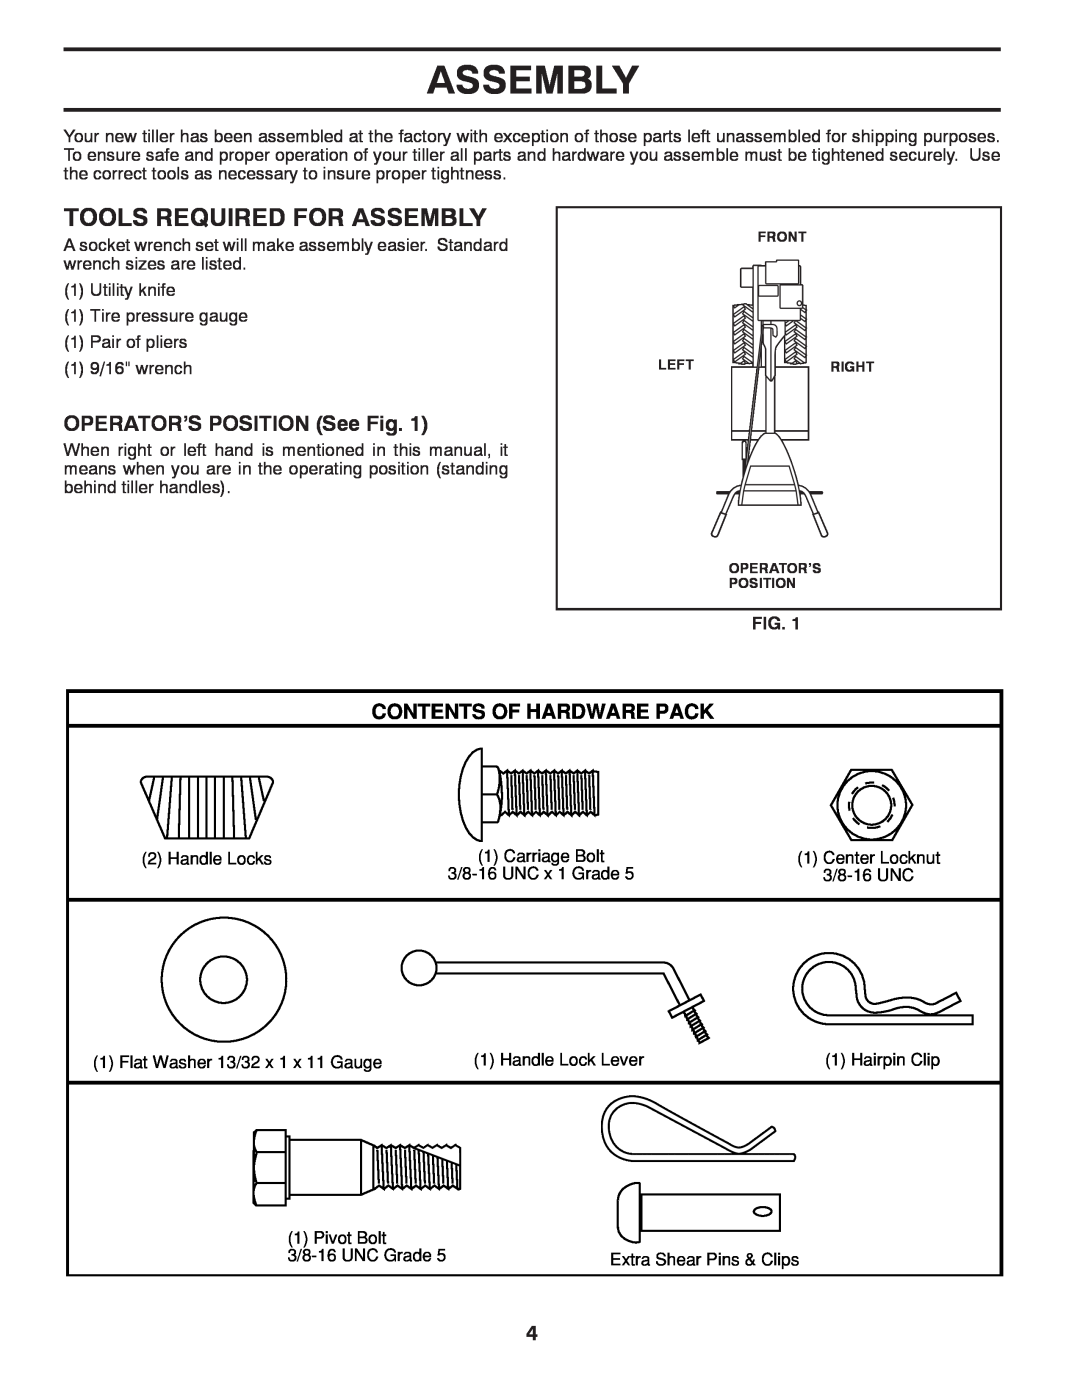 Poulan 418121, 96092001500 manual Tools Required For Assembly, OPERATOR’S POSITION See Fig, Contents Of Hardware Pack 